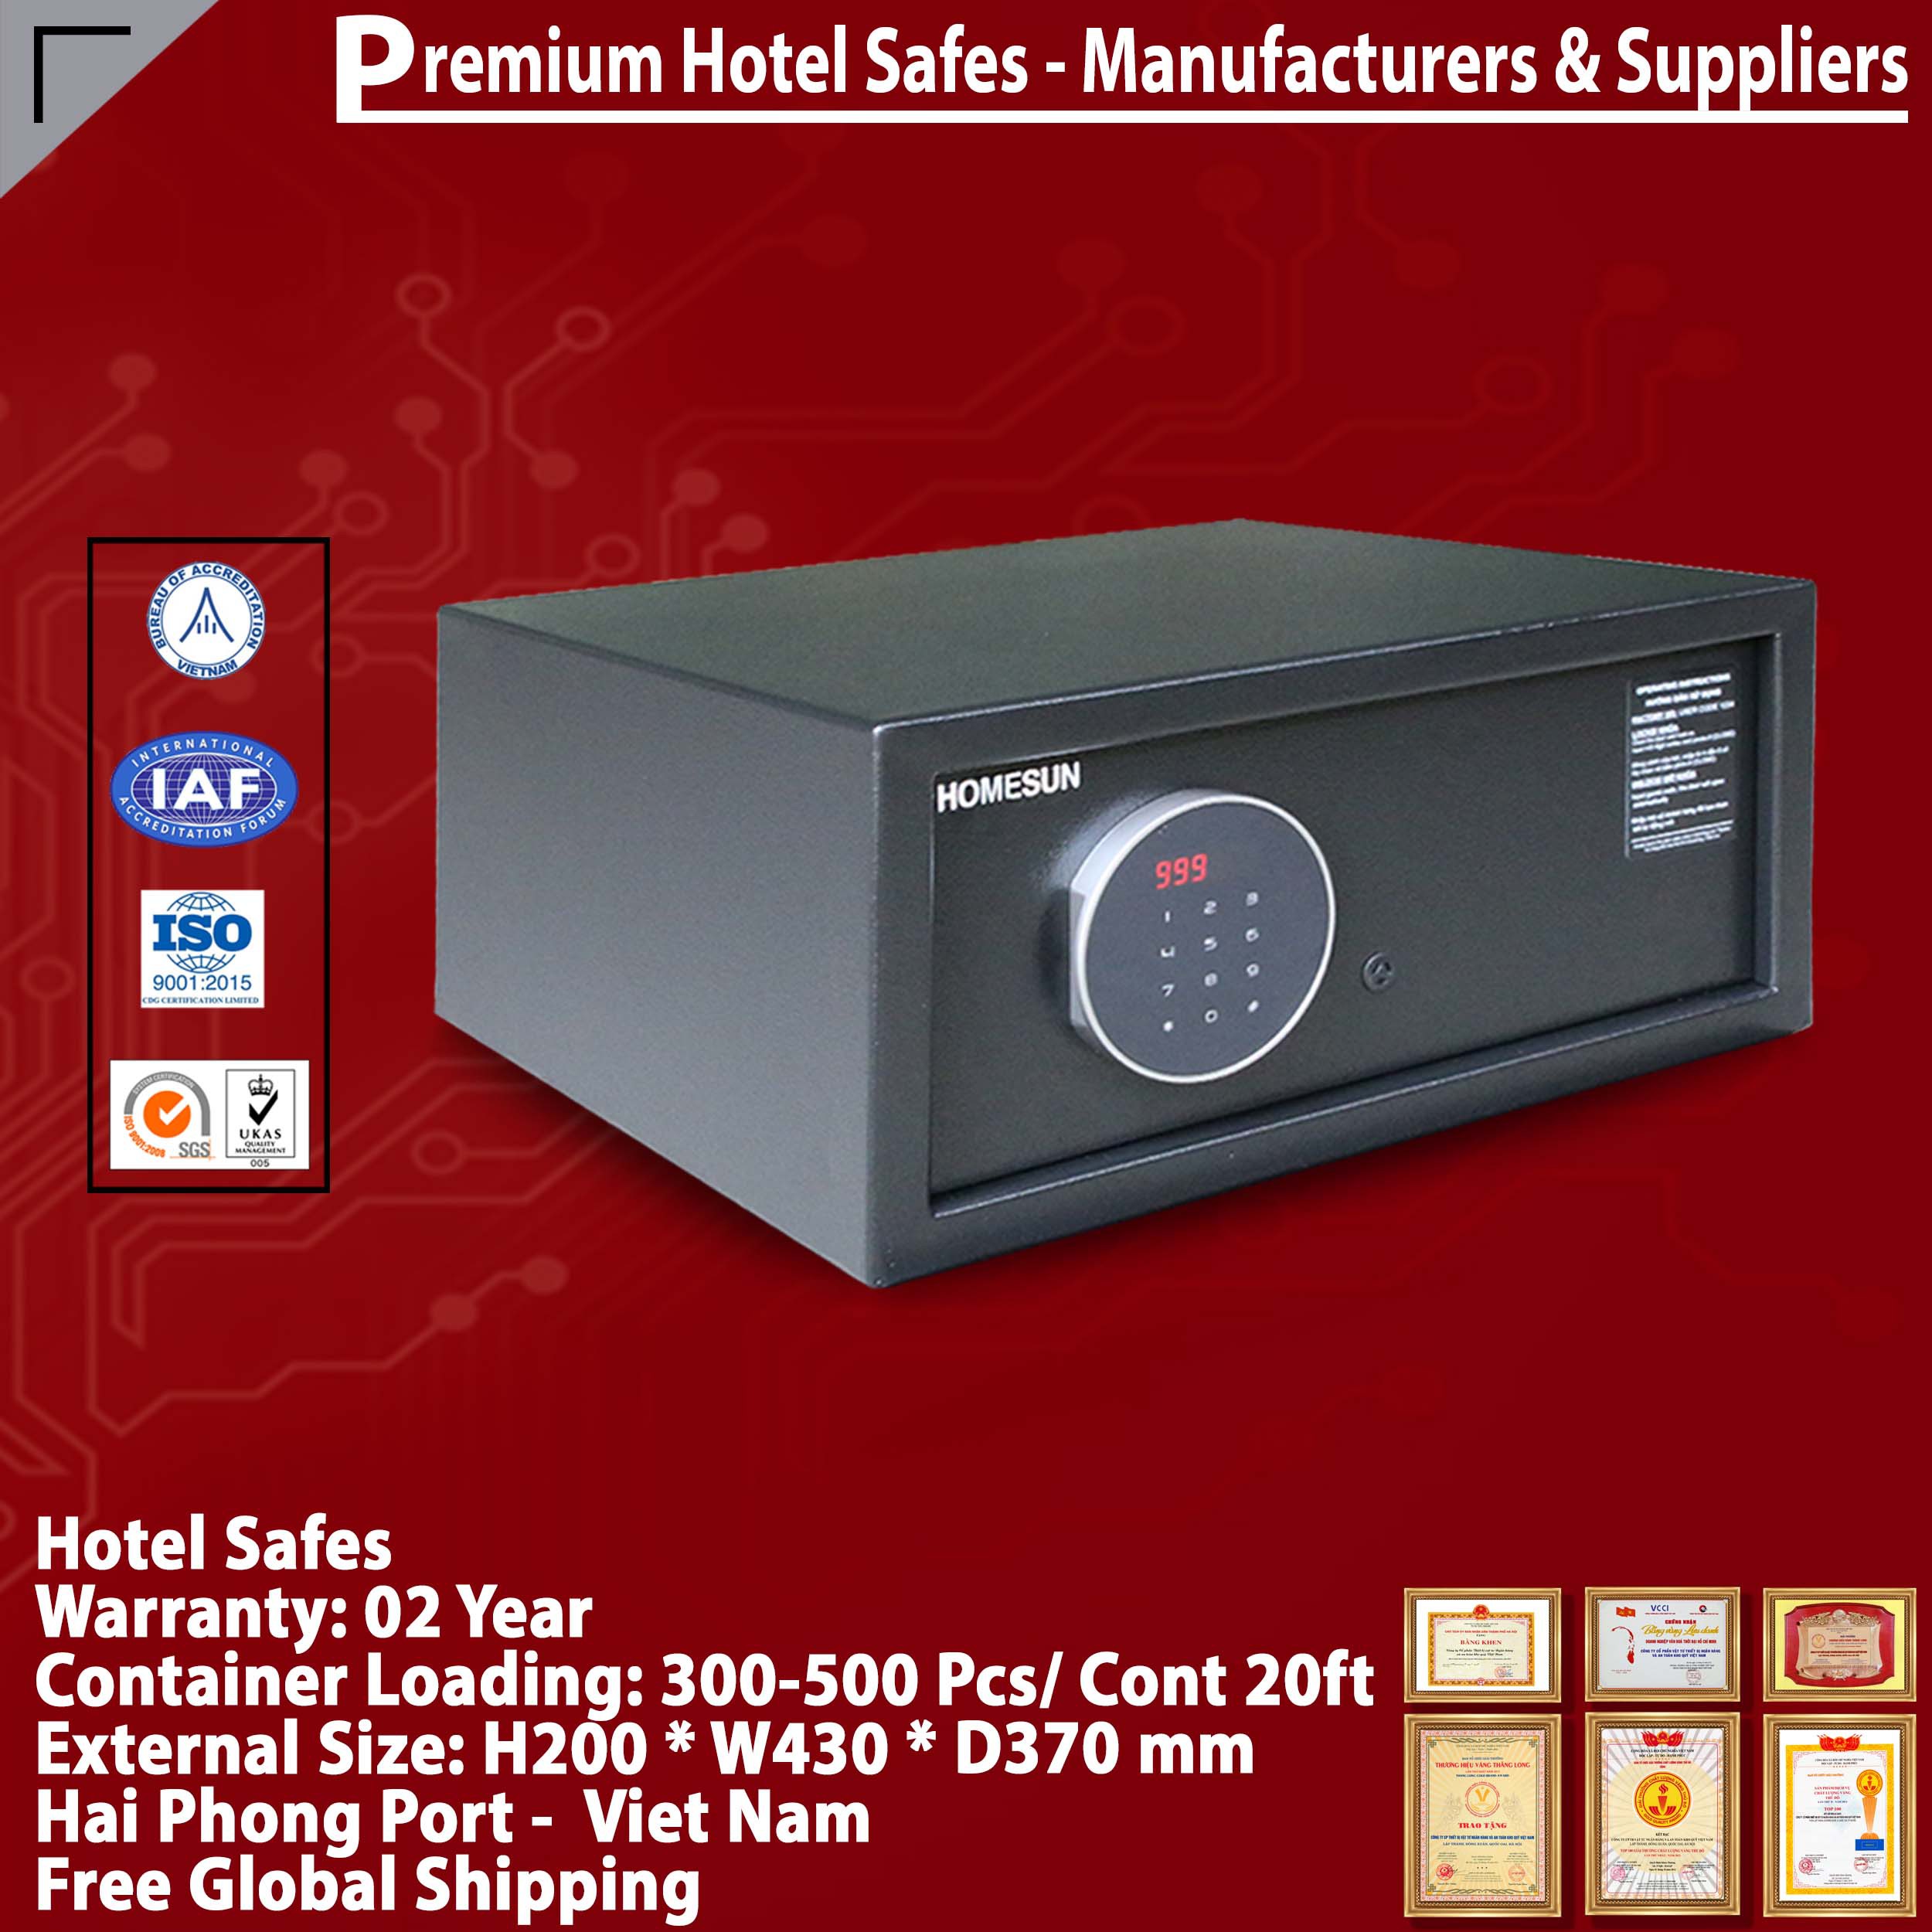 Hotel Room Safe Manufacturing Facility